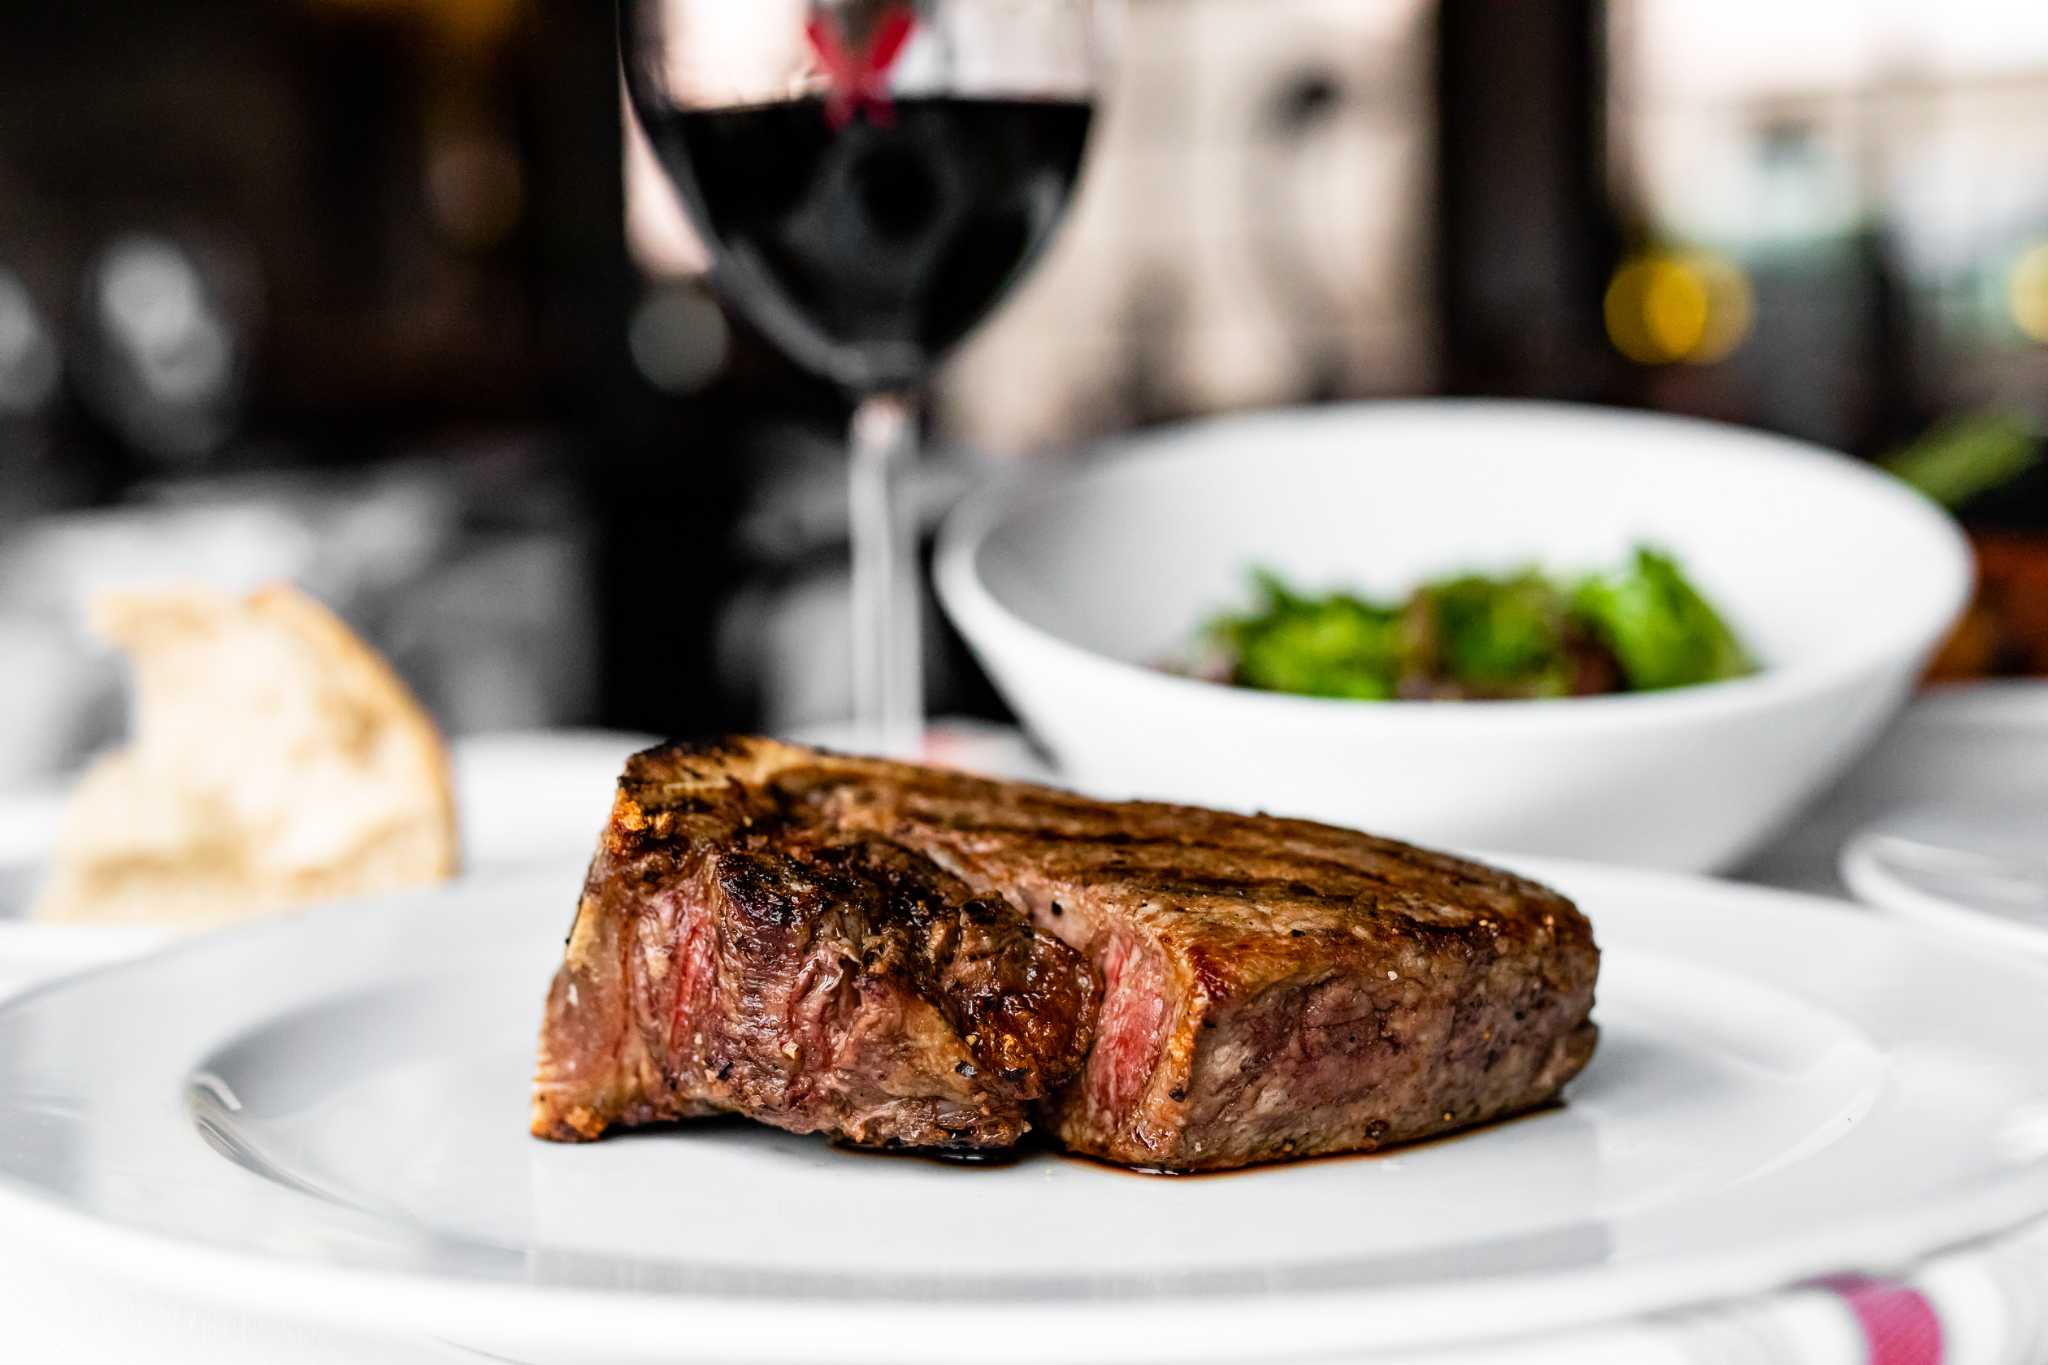 How to Pair Wine and A5 Japanese Wagyu Beef, According to Sommeliers